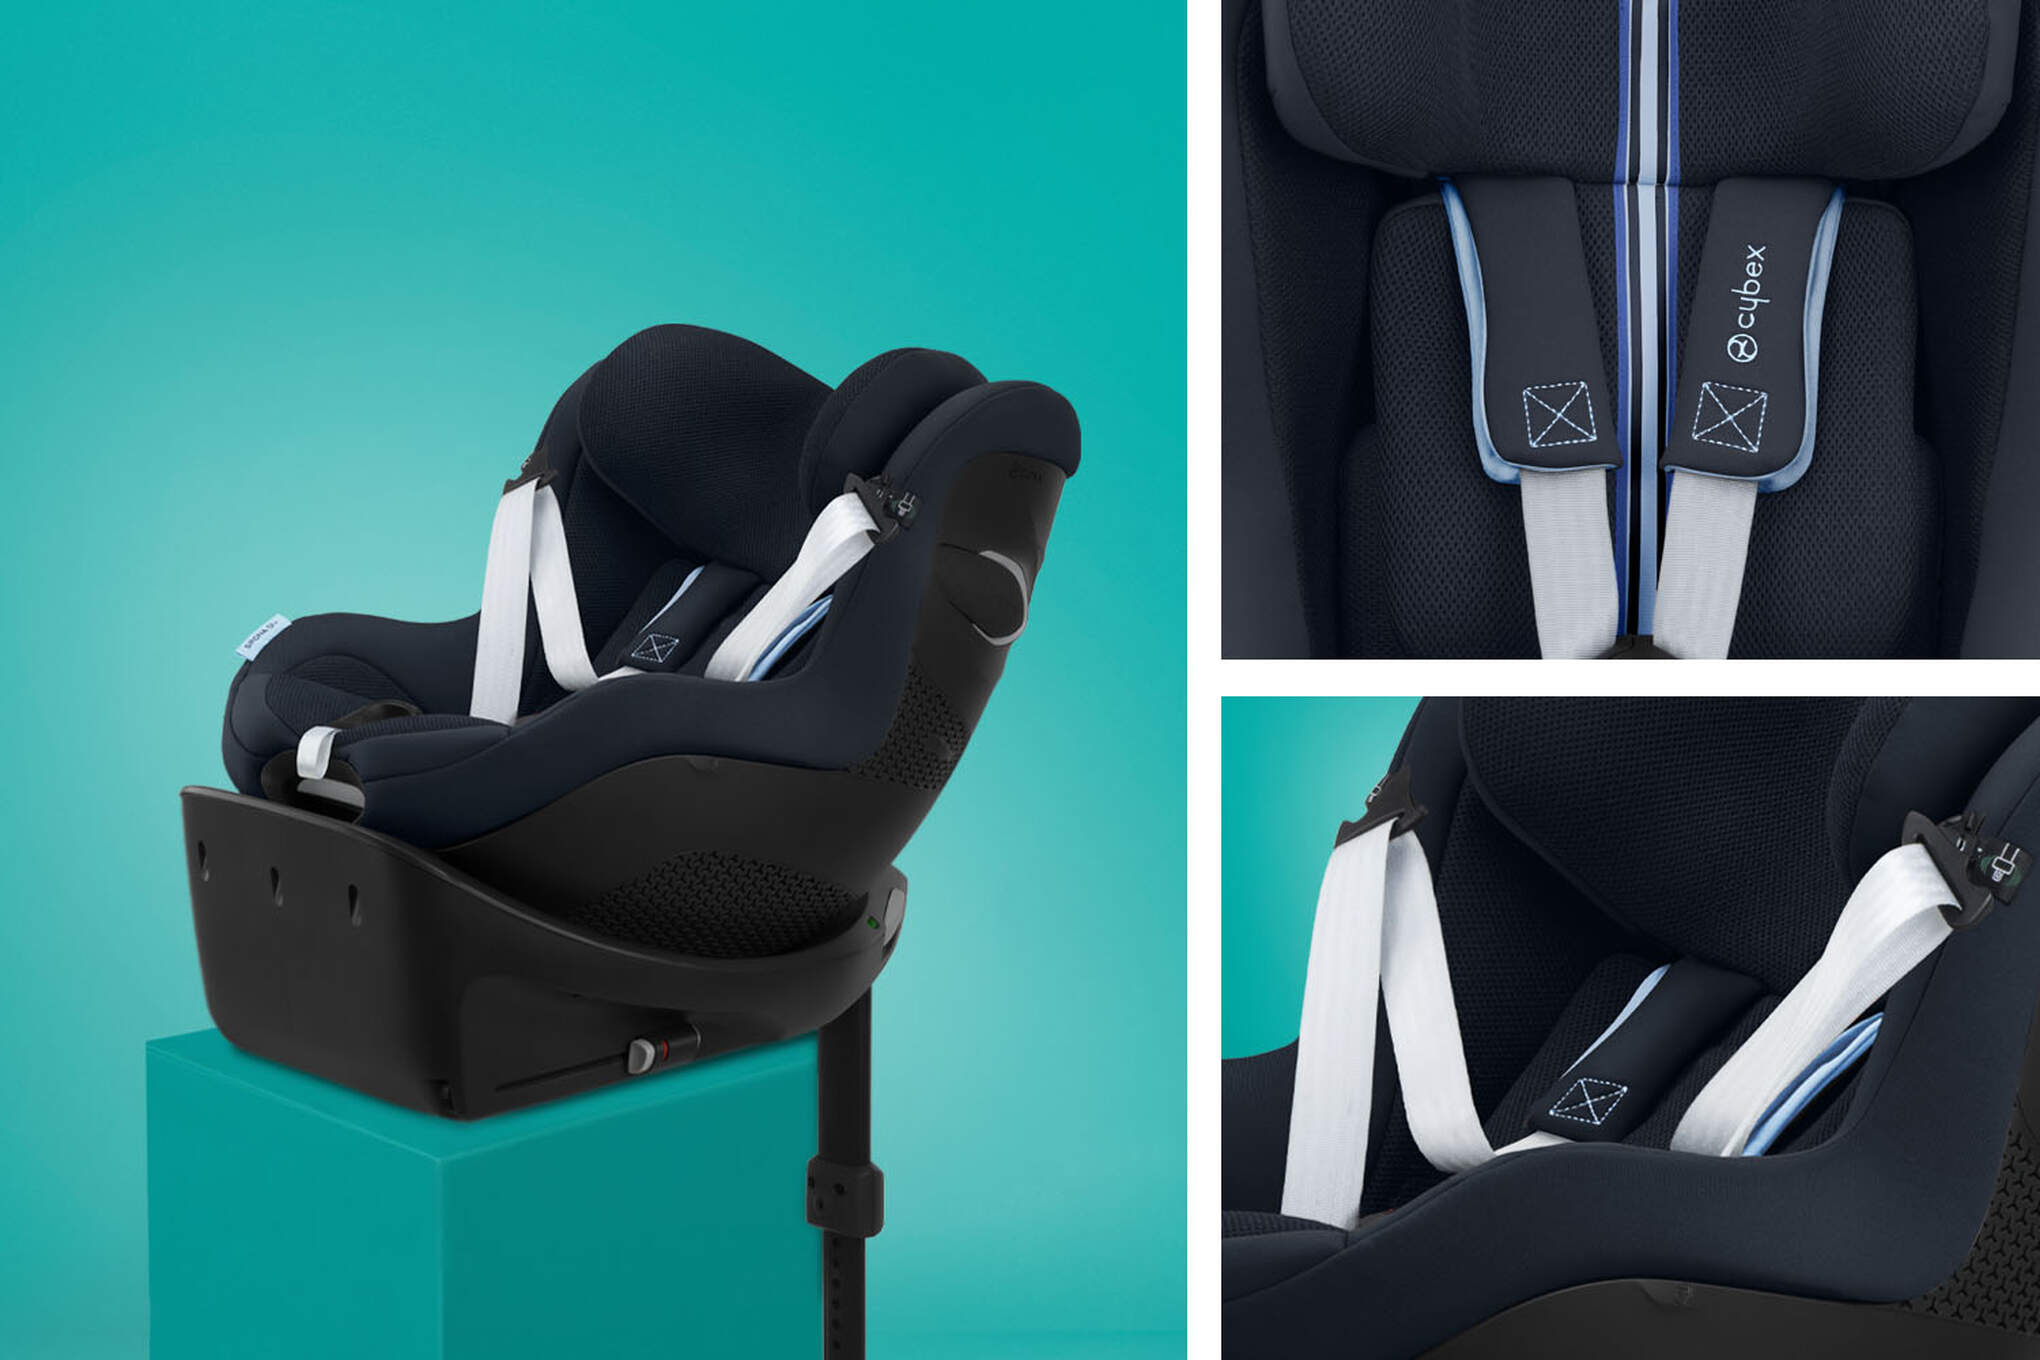 CYBEX Gold Libelle Pushchair Campaign Image